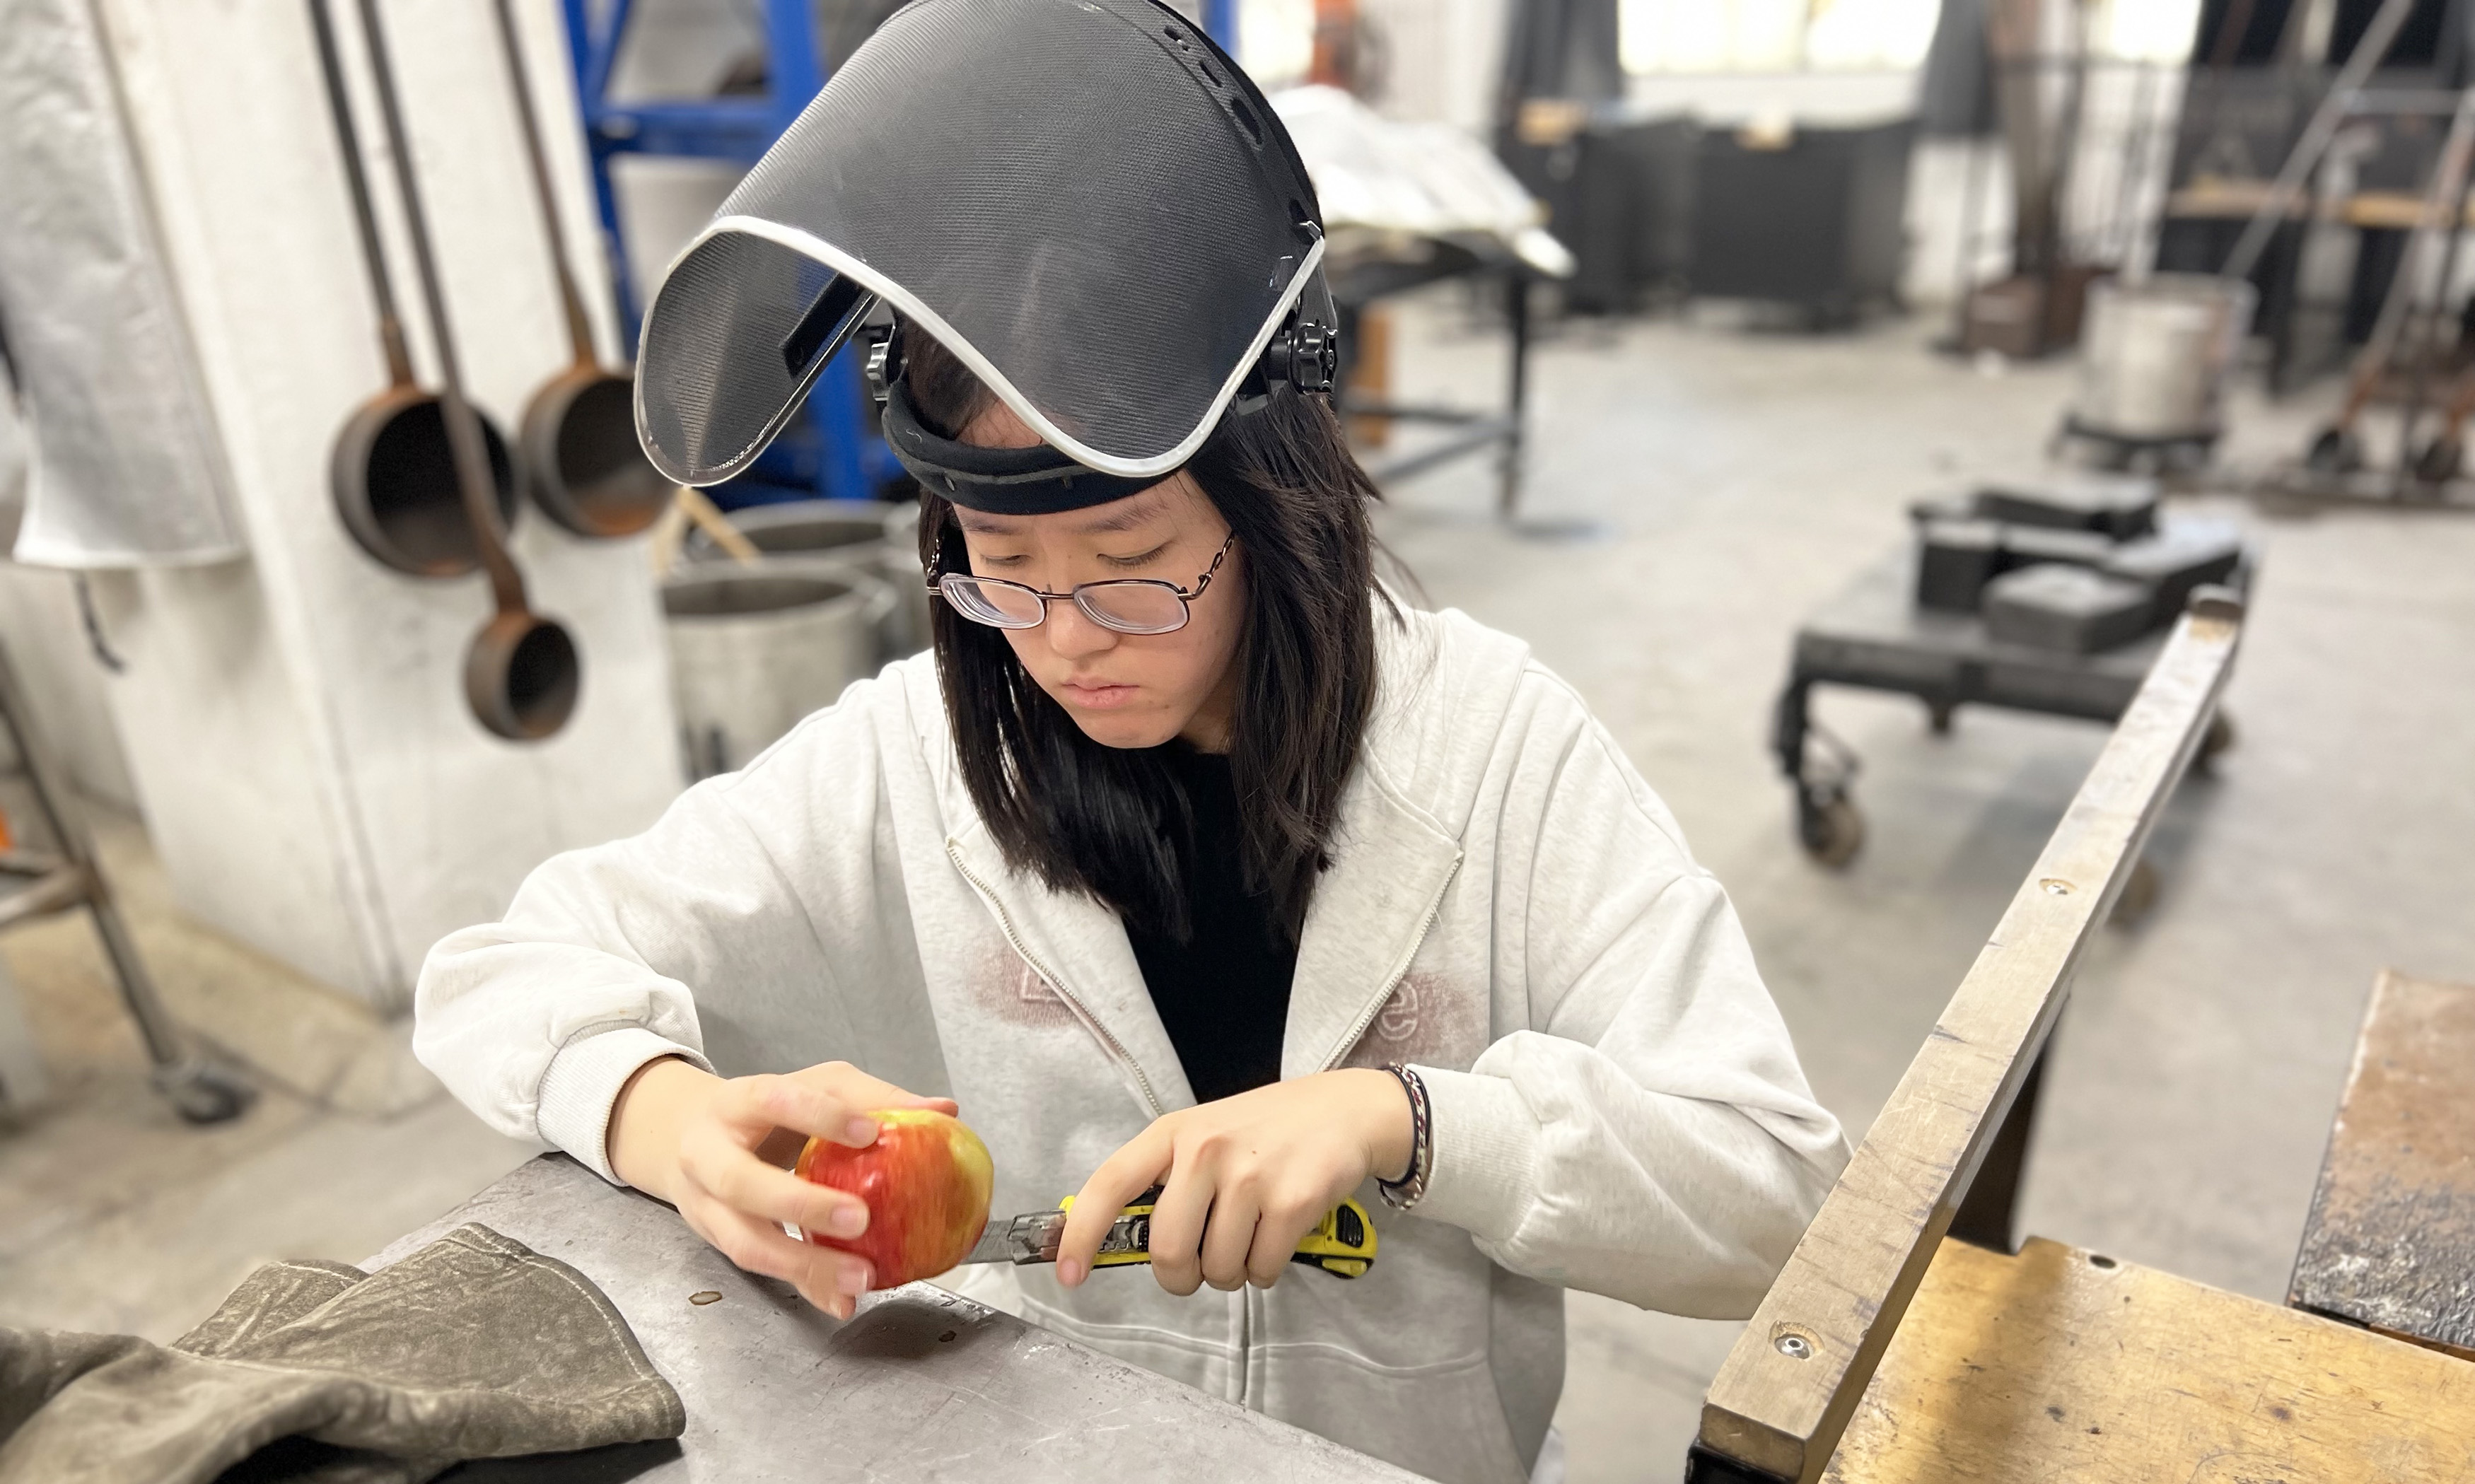 a student in a raised face shield cuts an apple in the hot shop